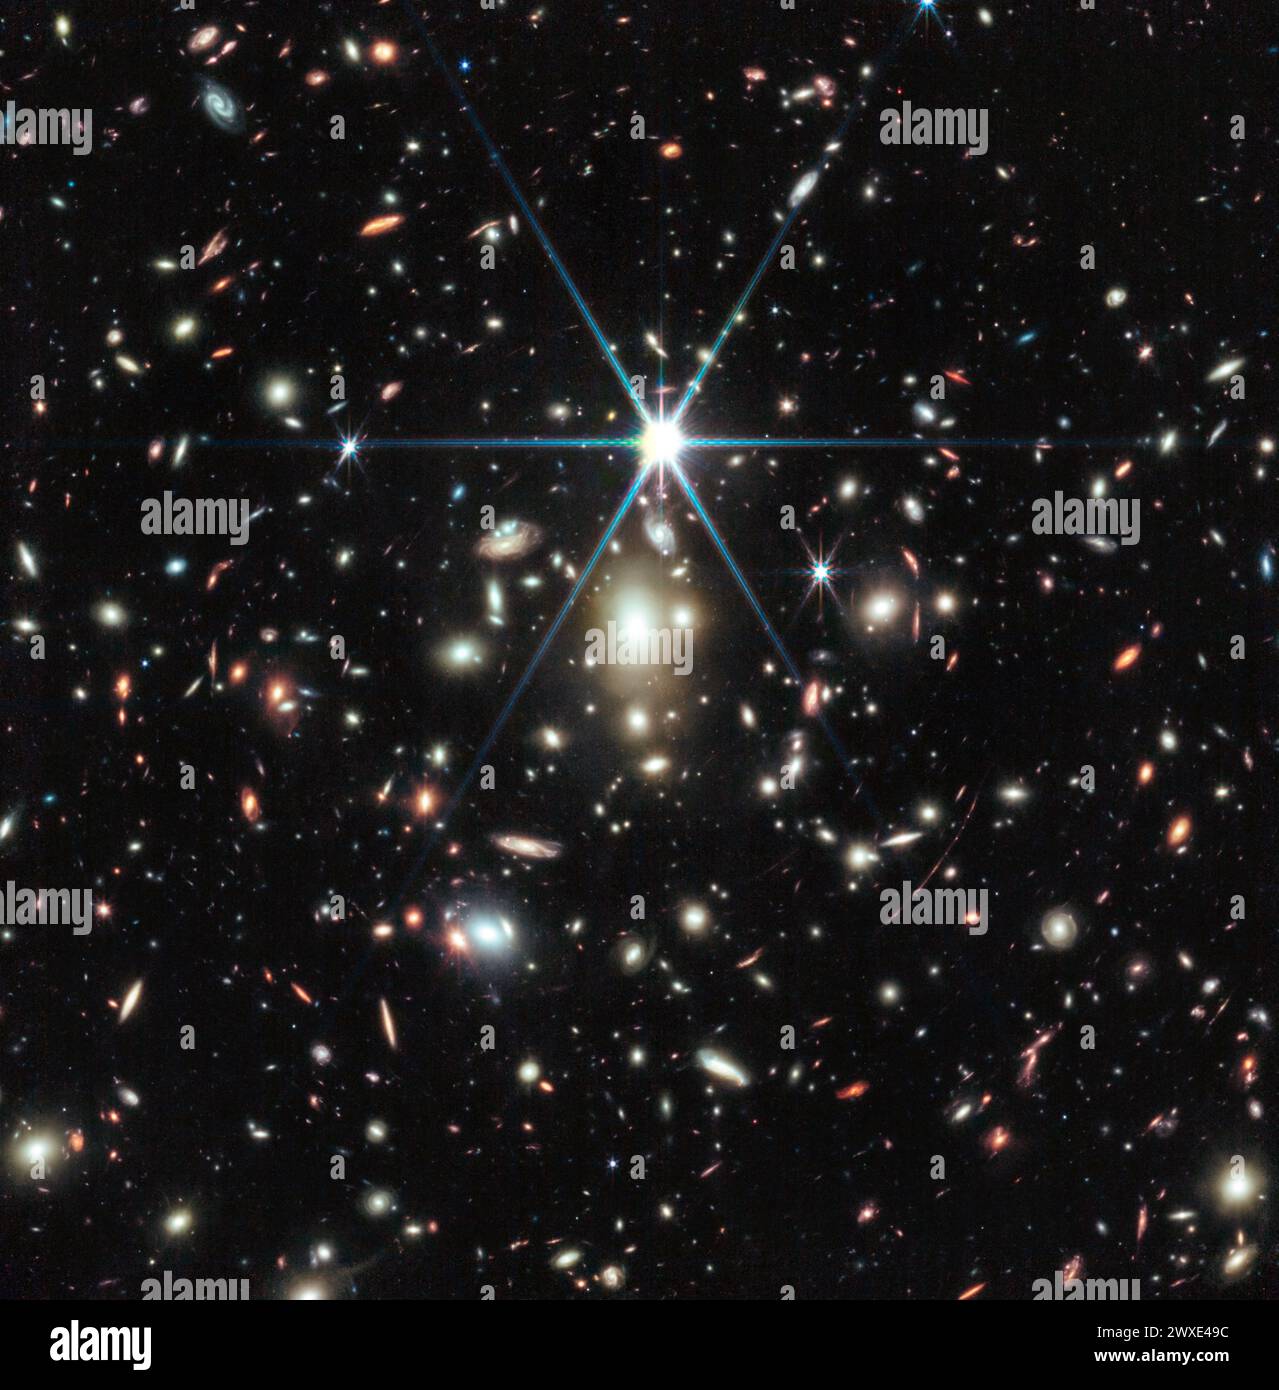 This image from NASA's James Webb Space Telescope of a massive galaxy cluster called WHL0137-08 contains the most strongly magnified galaxy known in the universe's first billion years: the Sunrise Arc, and within that galaxy, the most distant star ever detected. In this image, the Sunrise Arc appears as a red streak just below the diffraction spike at the 5 o'clock position.  Credit: NASA, ESA, CSA, Dan Coe (STScI/AURA for ESA, JHU), Brian Welch (NASA-GSFC, UMD), with image processing by Zolt G. Levay Stock Photo